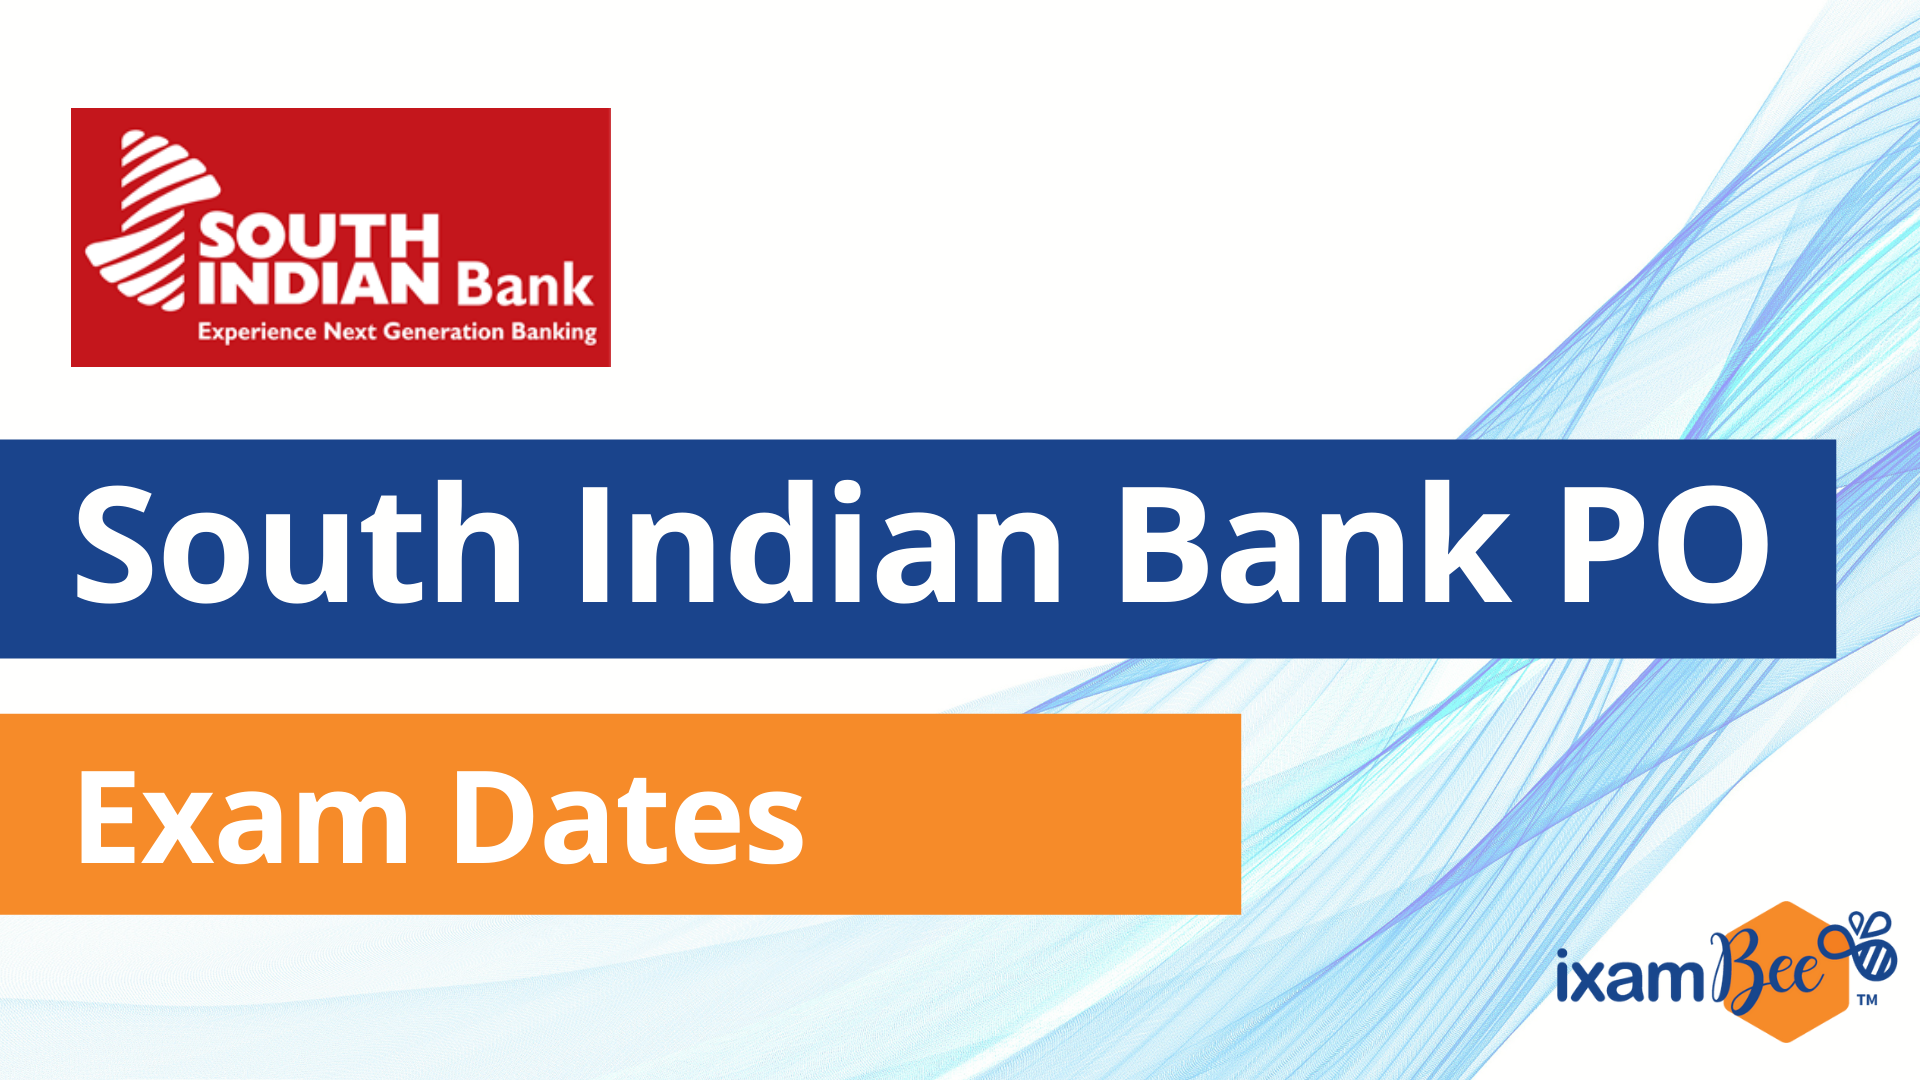 South Indian Bank PO Exam Dates